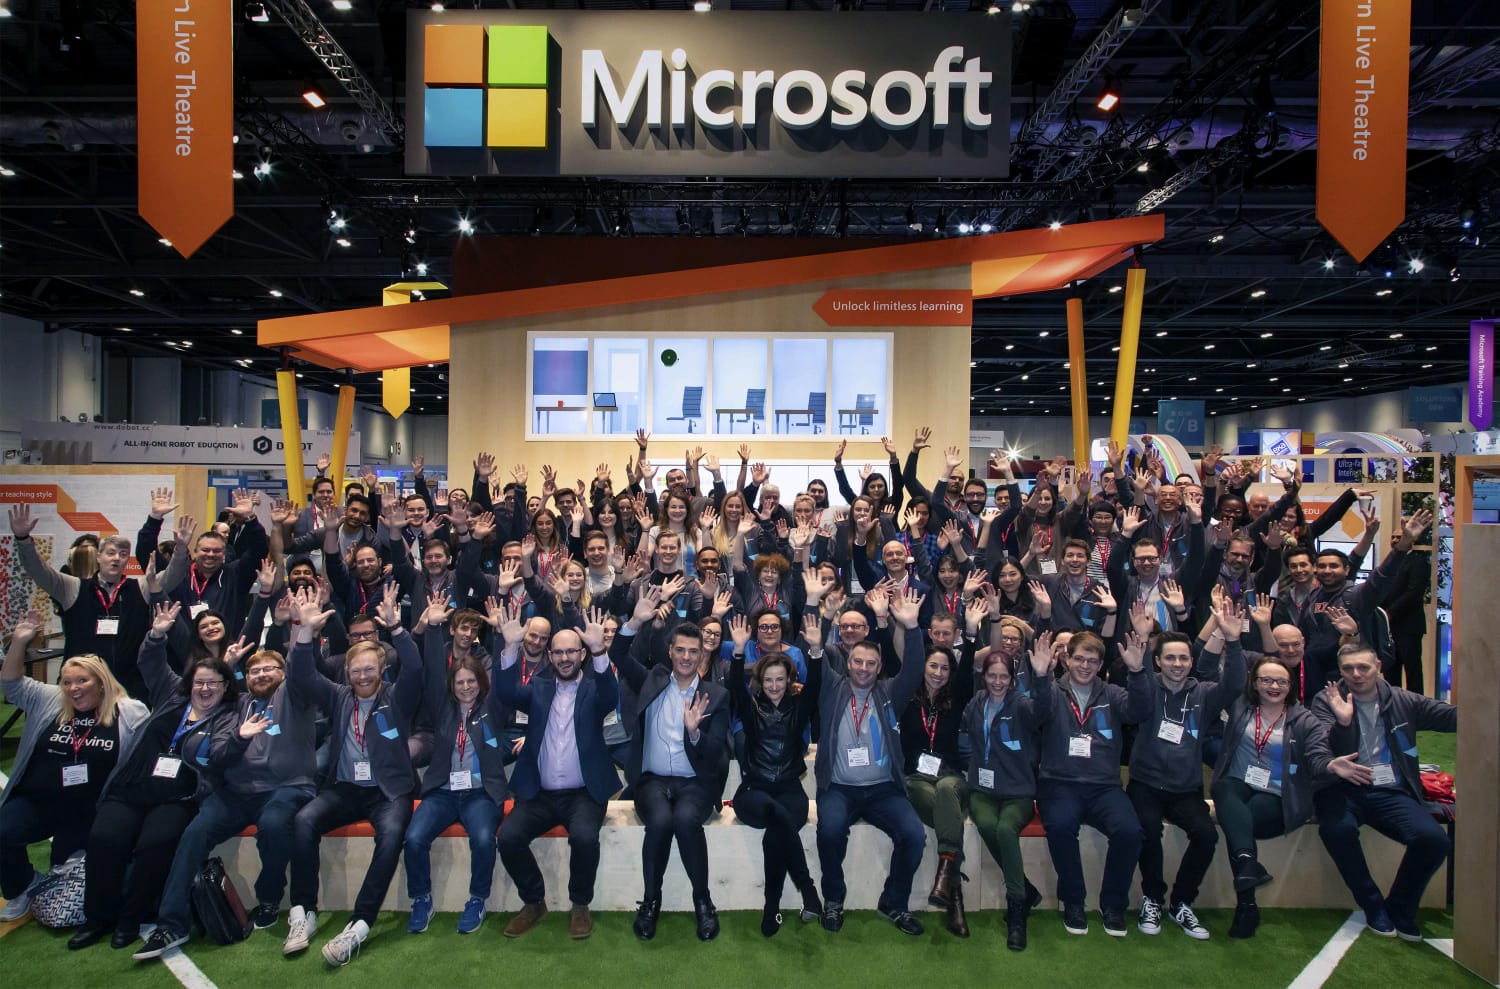 Image of a large group of people on the Microsoft stand at Bett